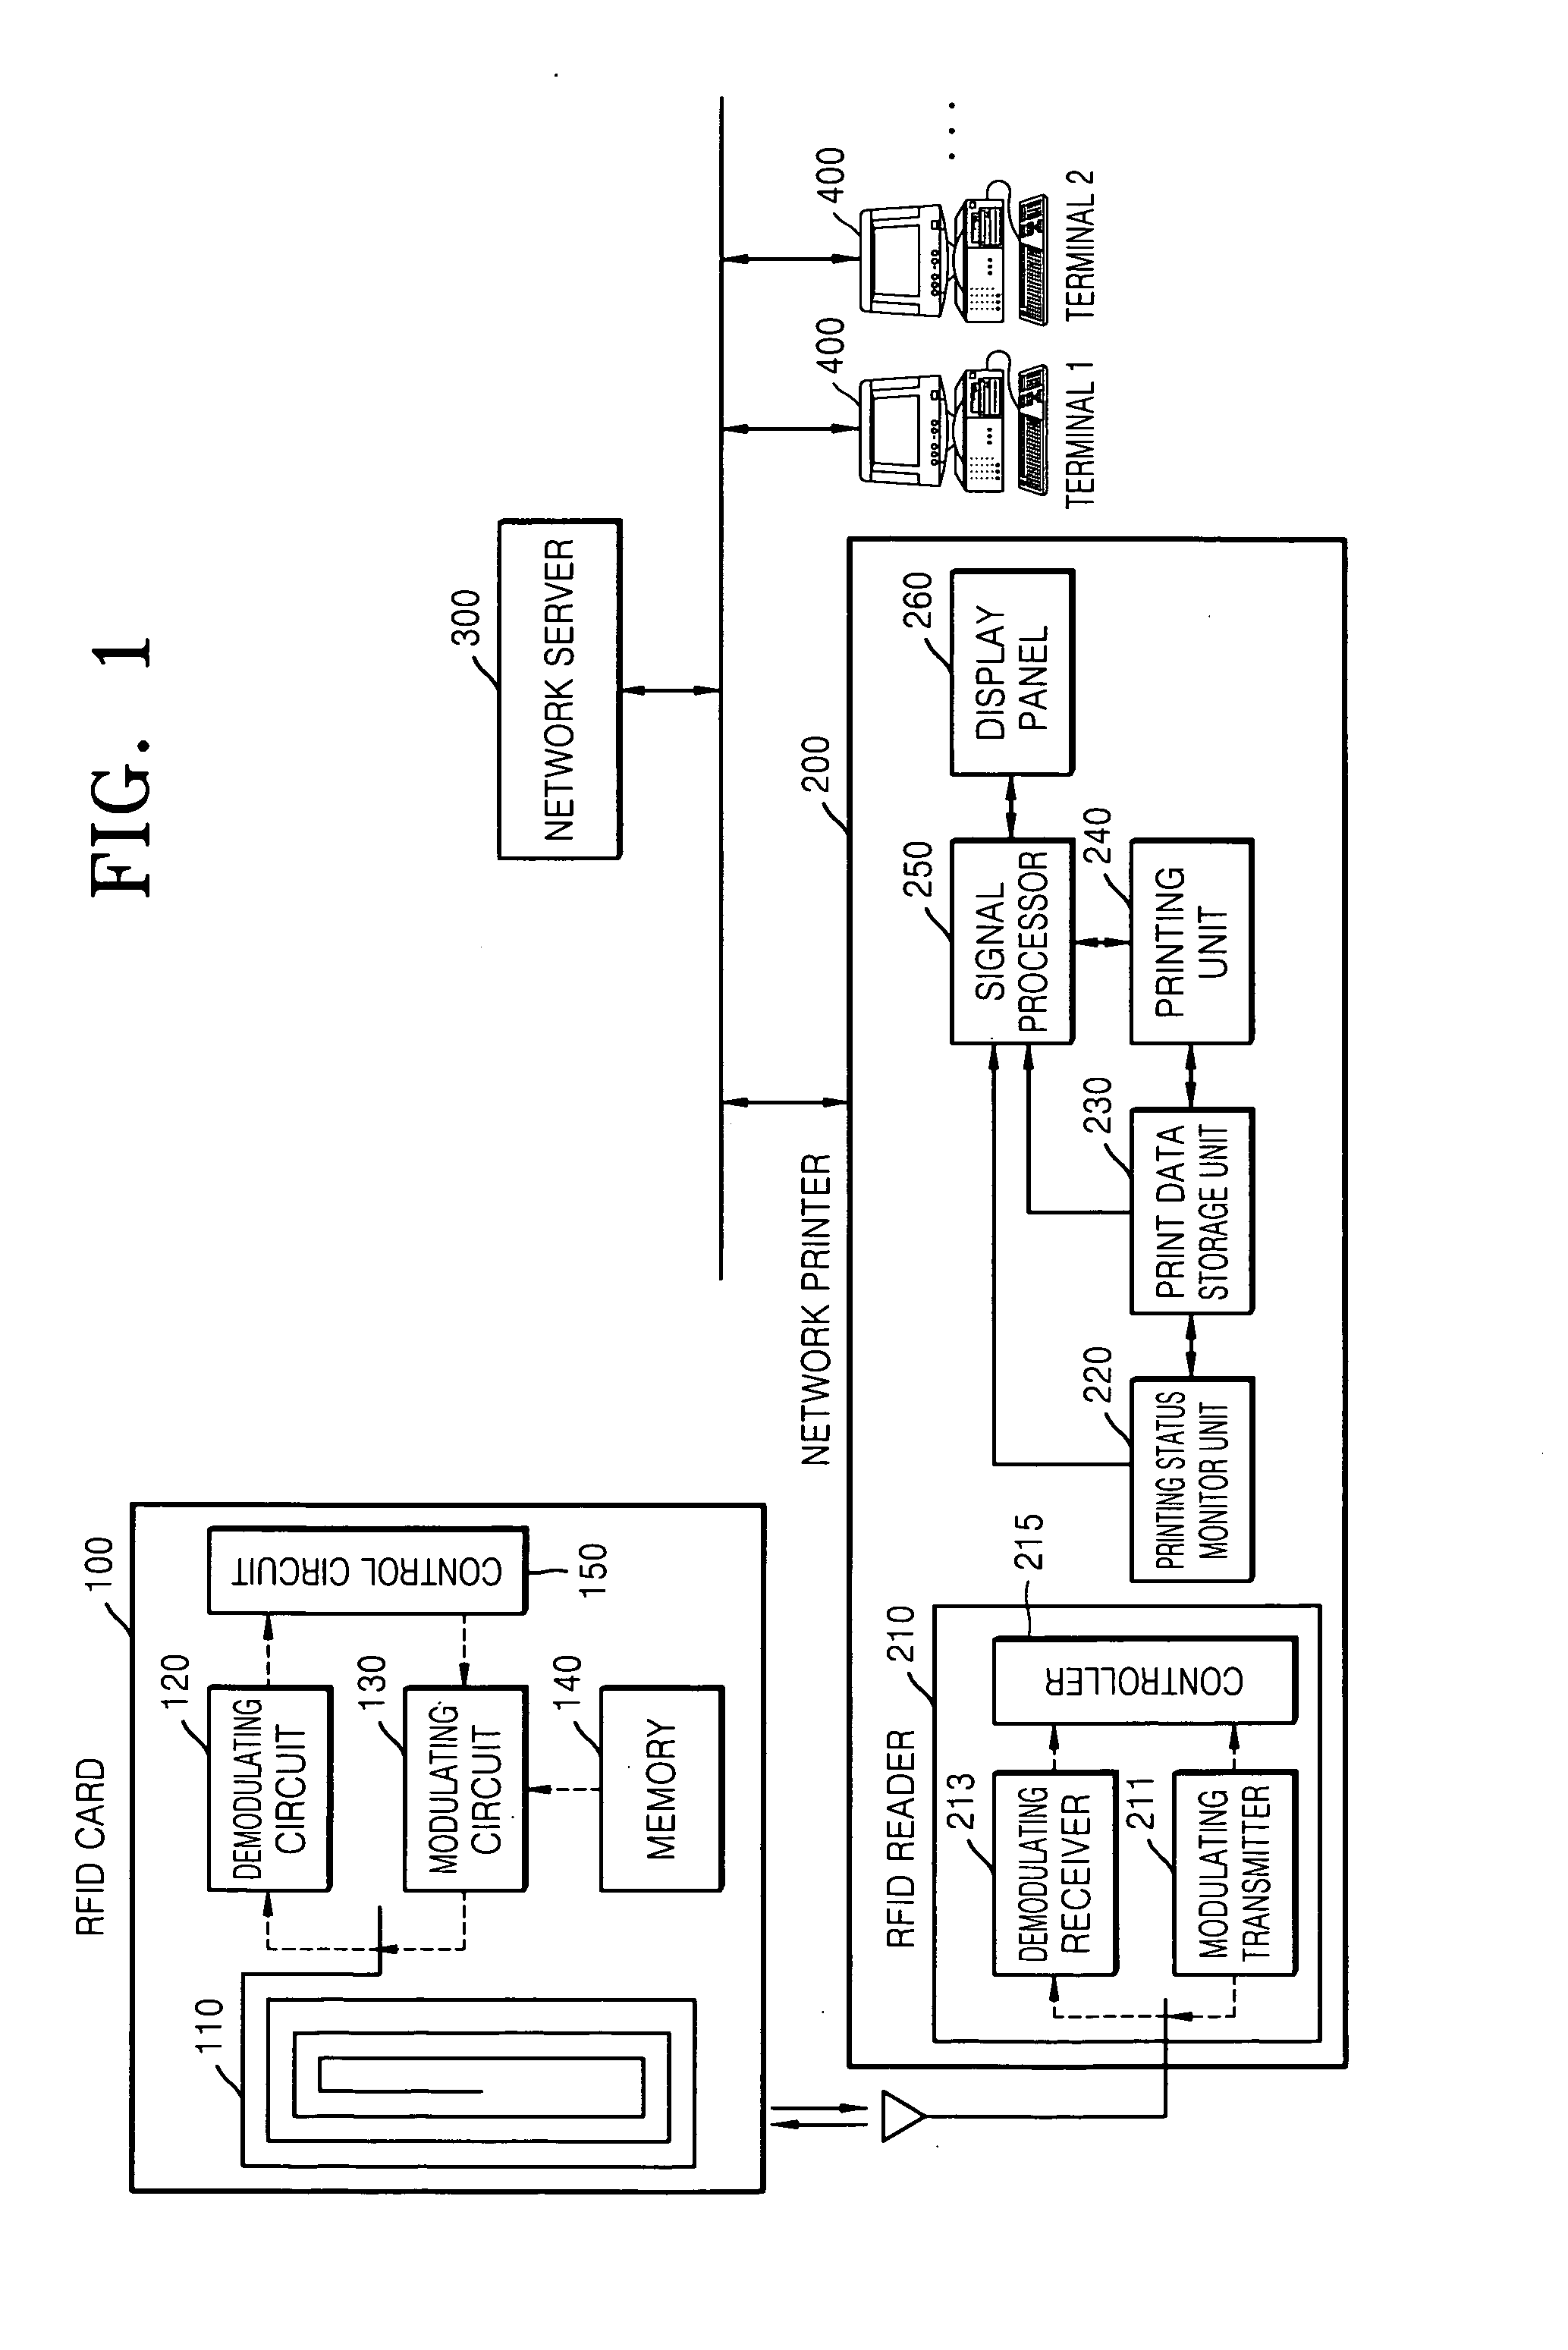 Printing information service system and method based on RFID technology